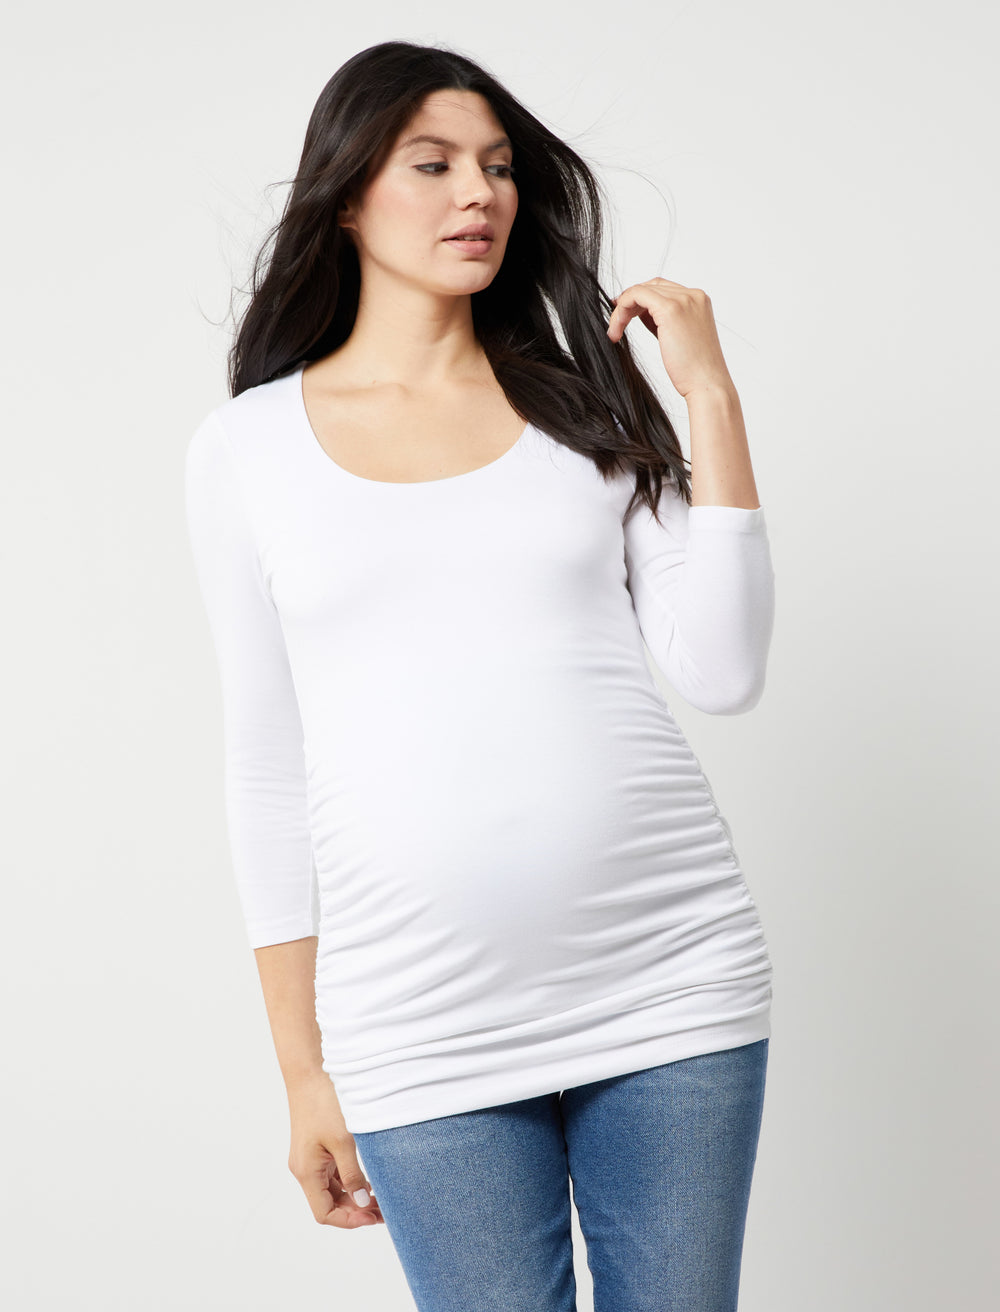 Basic Maternity Tank Top with Side Ruching